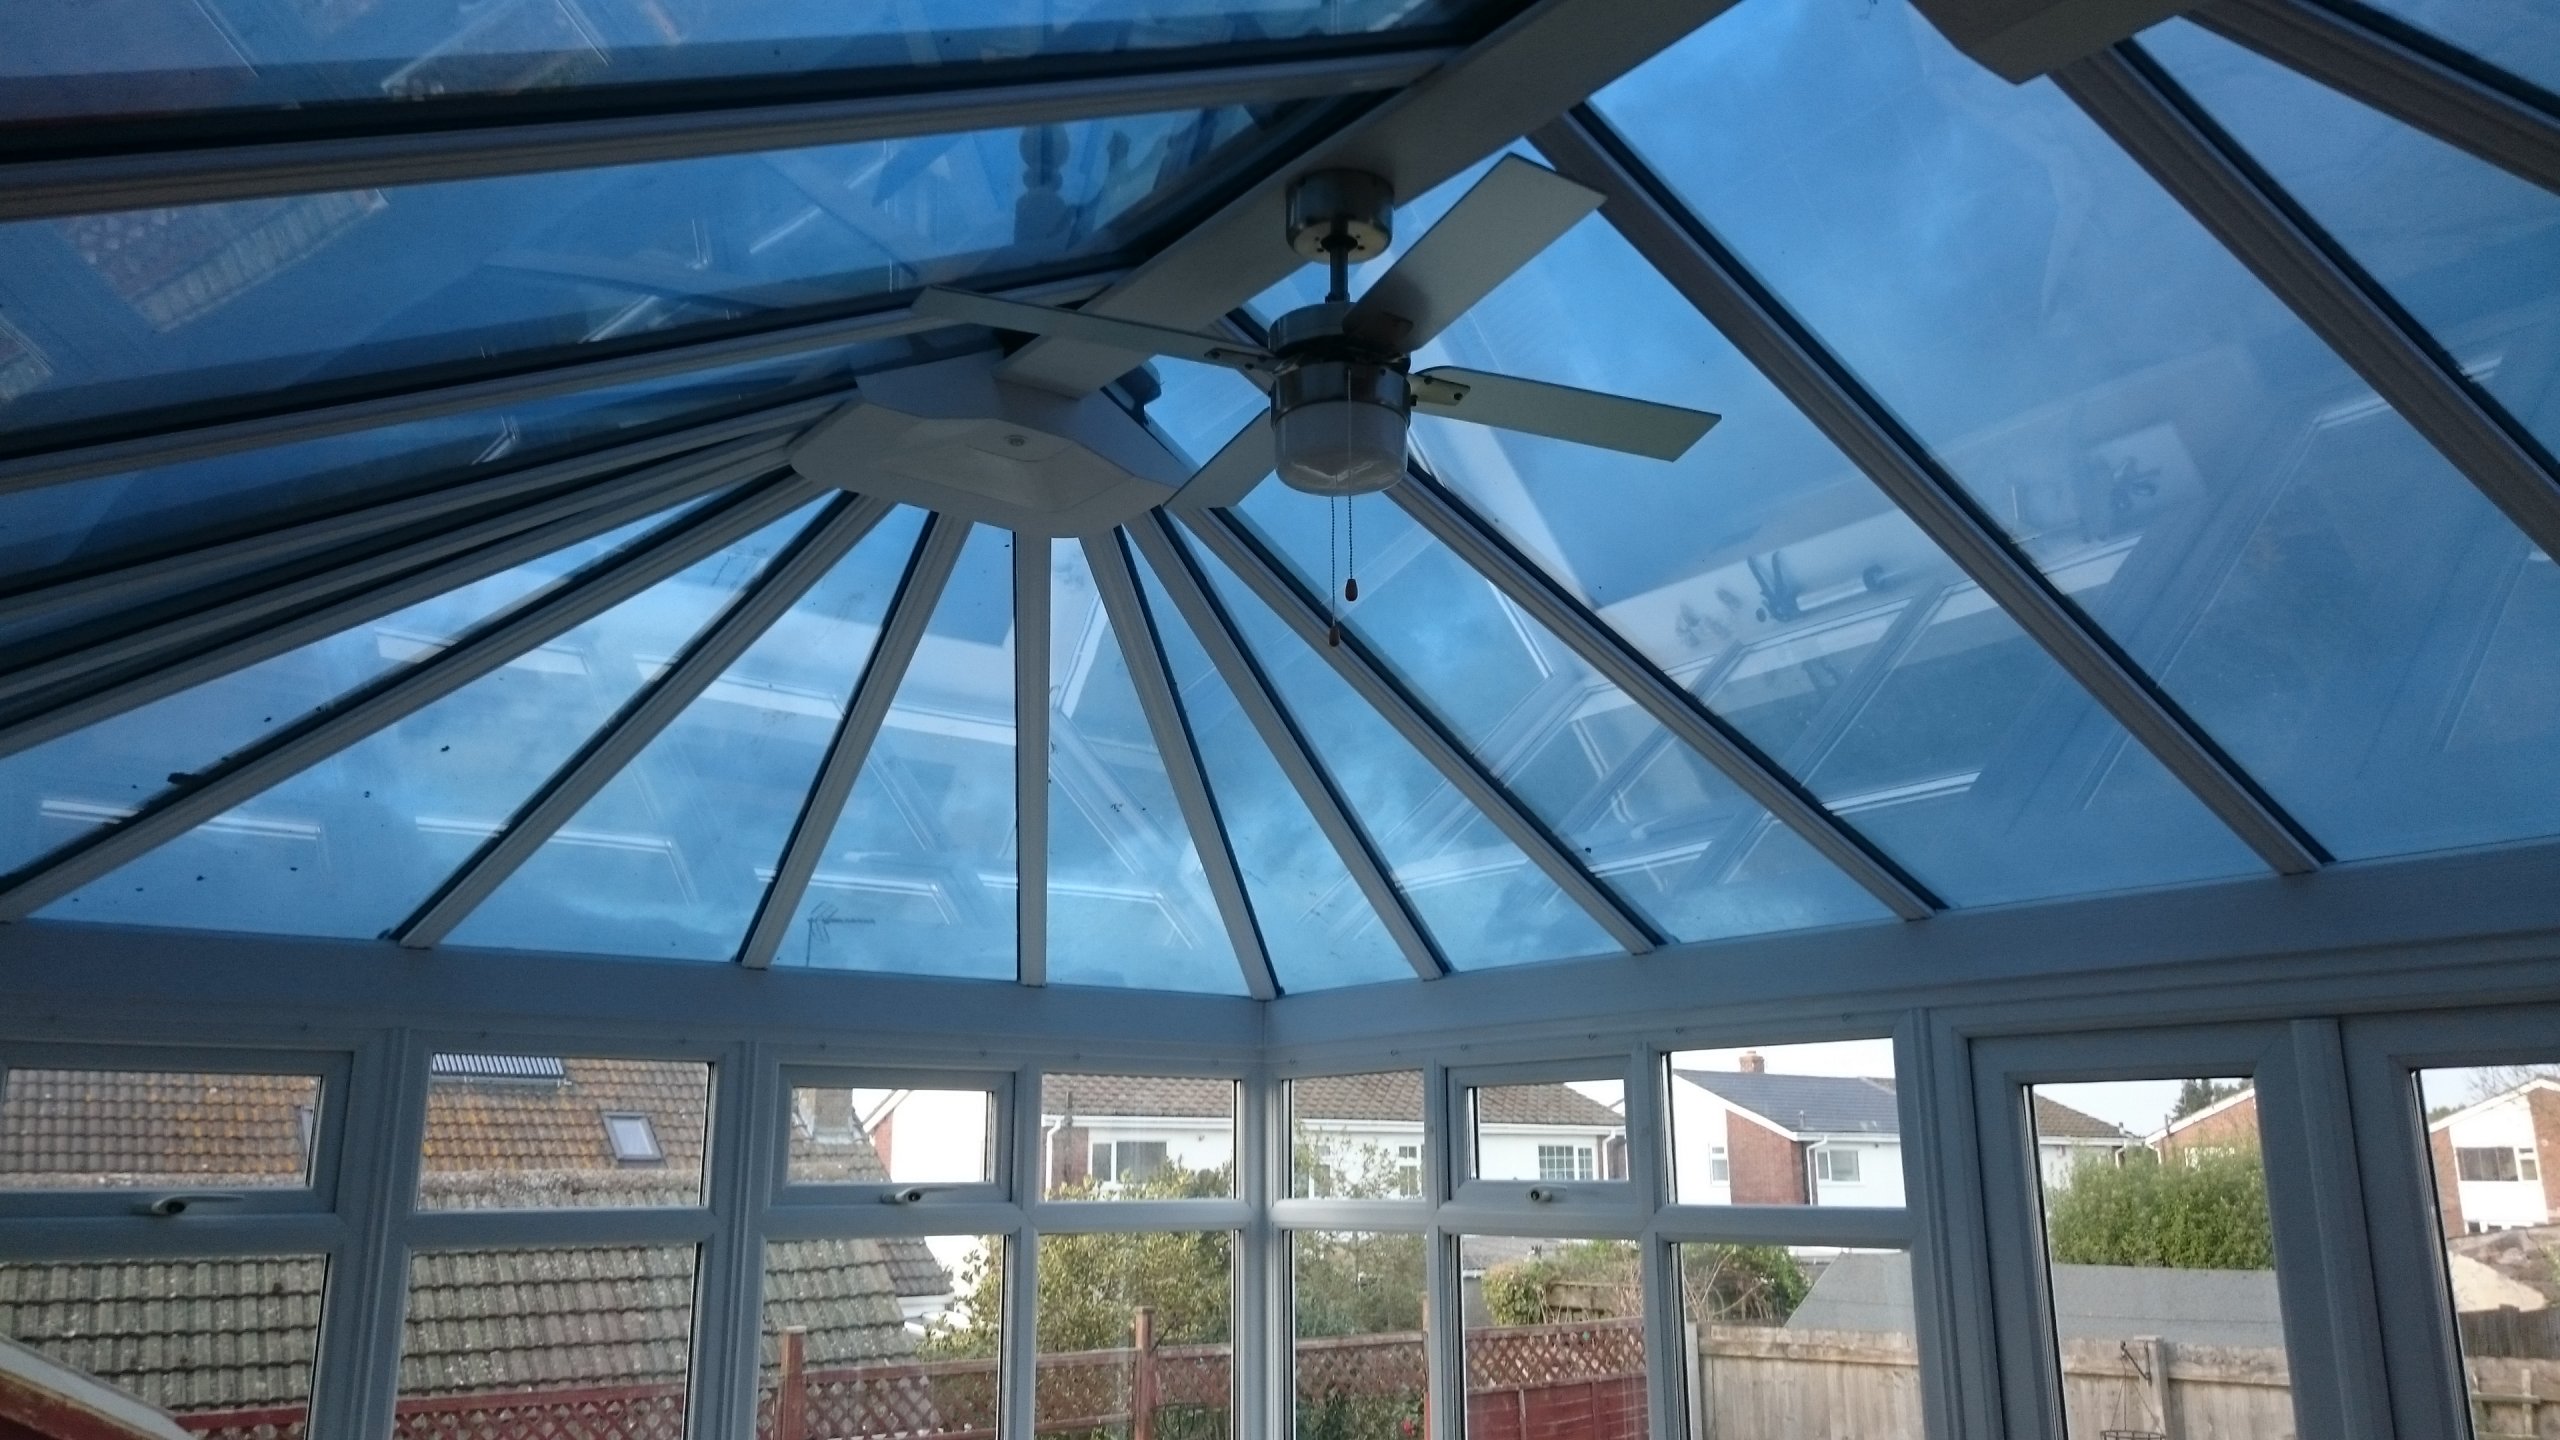 Dual 15 solar window film supplied and fitted to a conservatory roof in Weston-super-Mare. Installation by Tinting Express Barnstaple Devon.